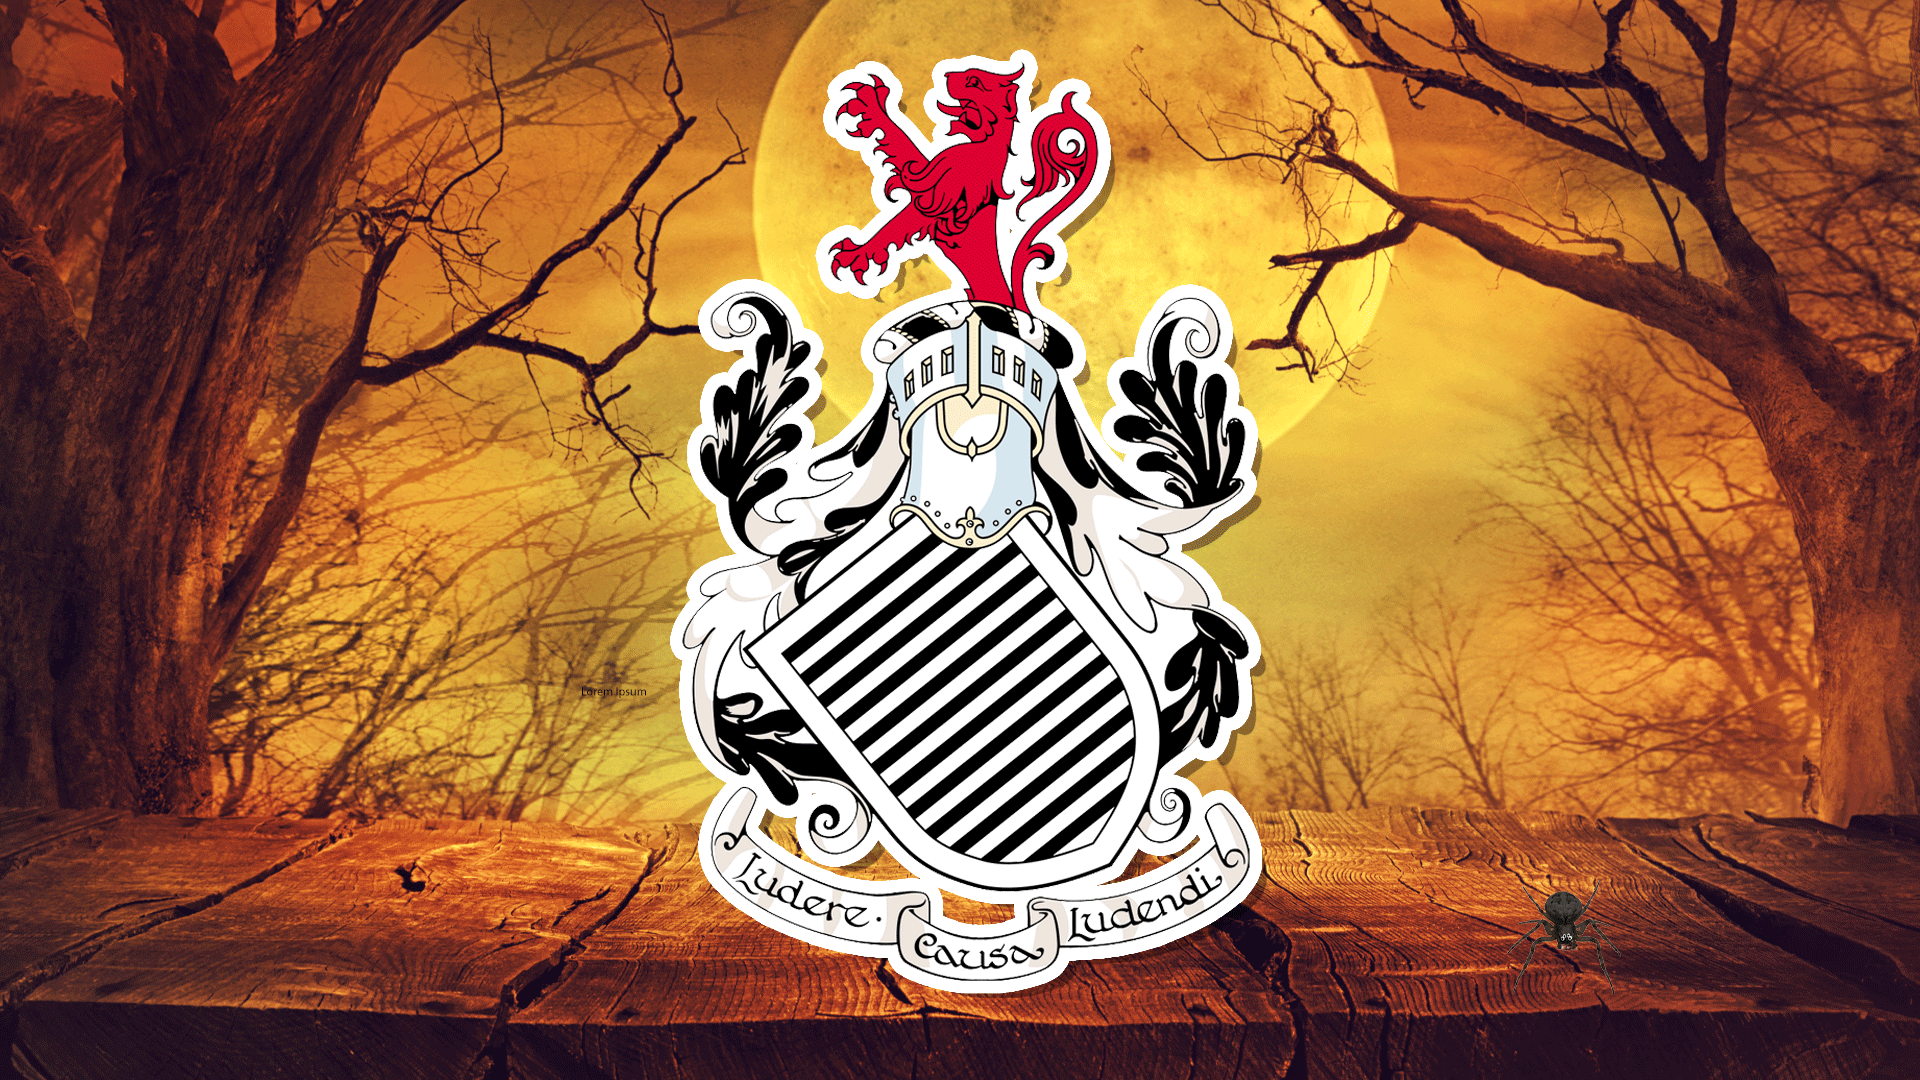 Queen's Park FC badge on a spooky background